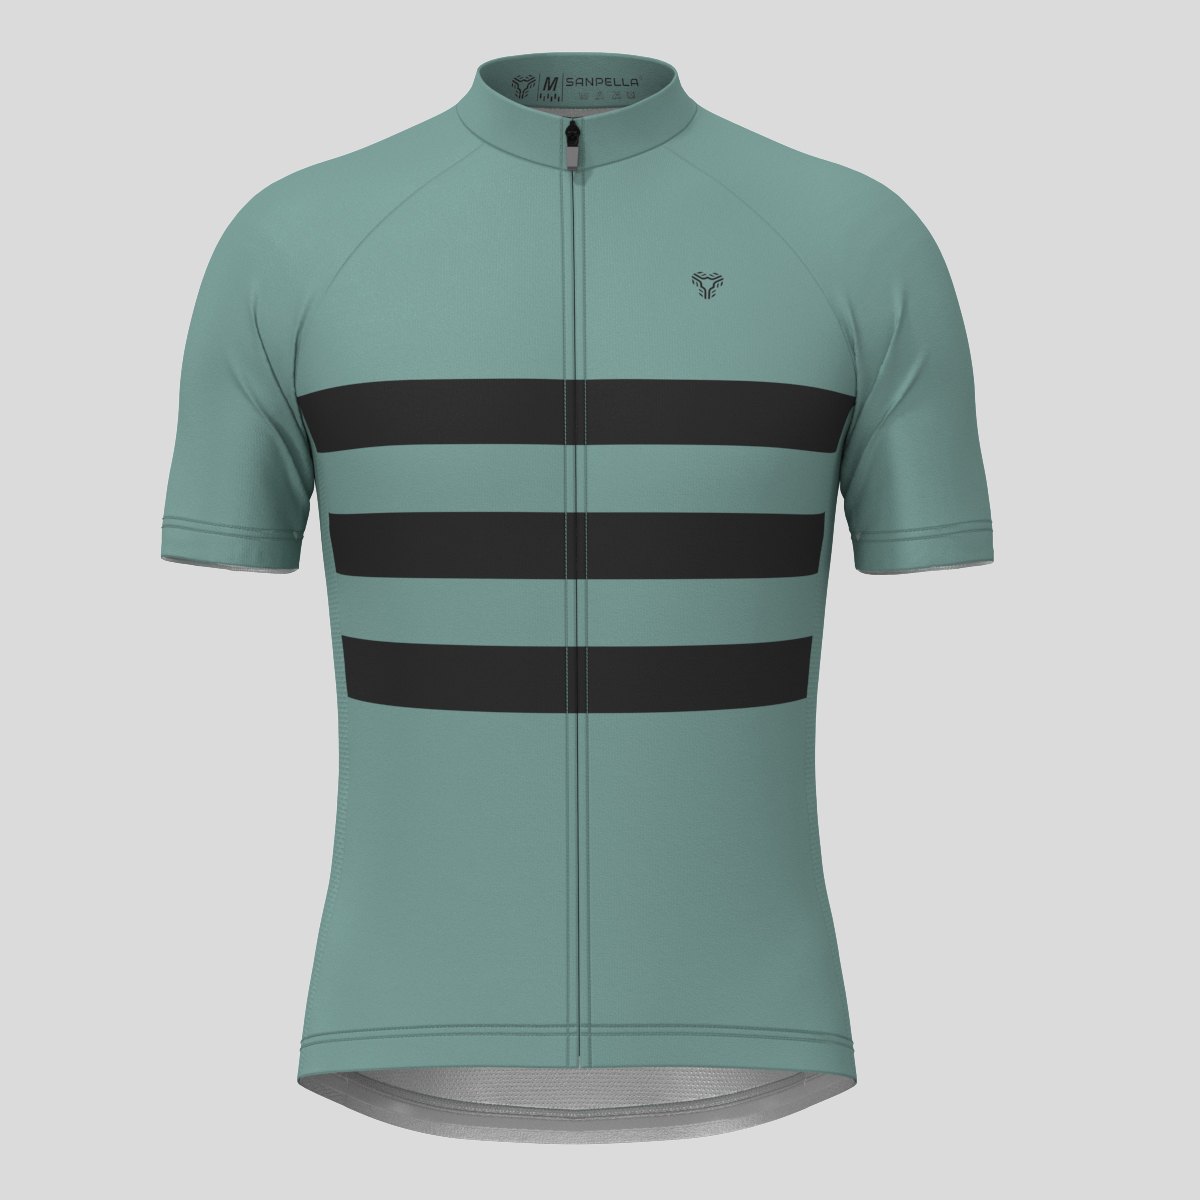 Men's Classic Stripes Cycling Jersey - Sage